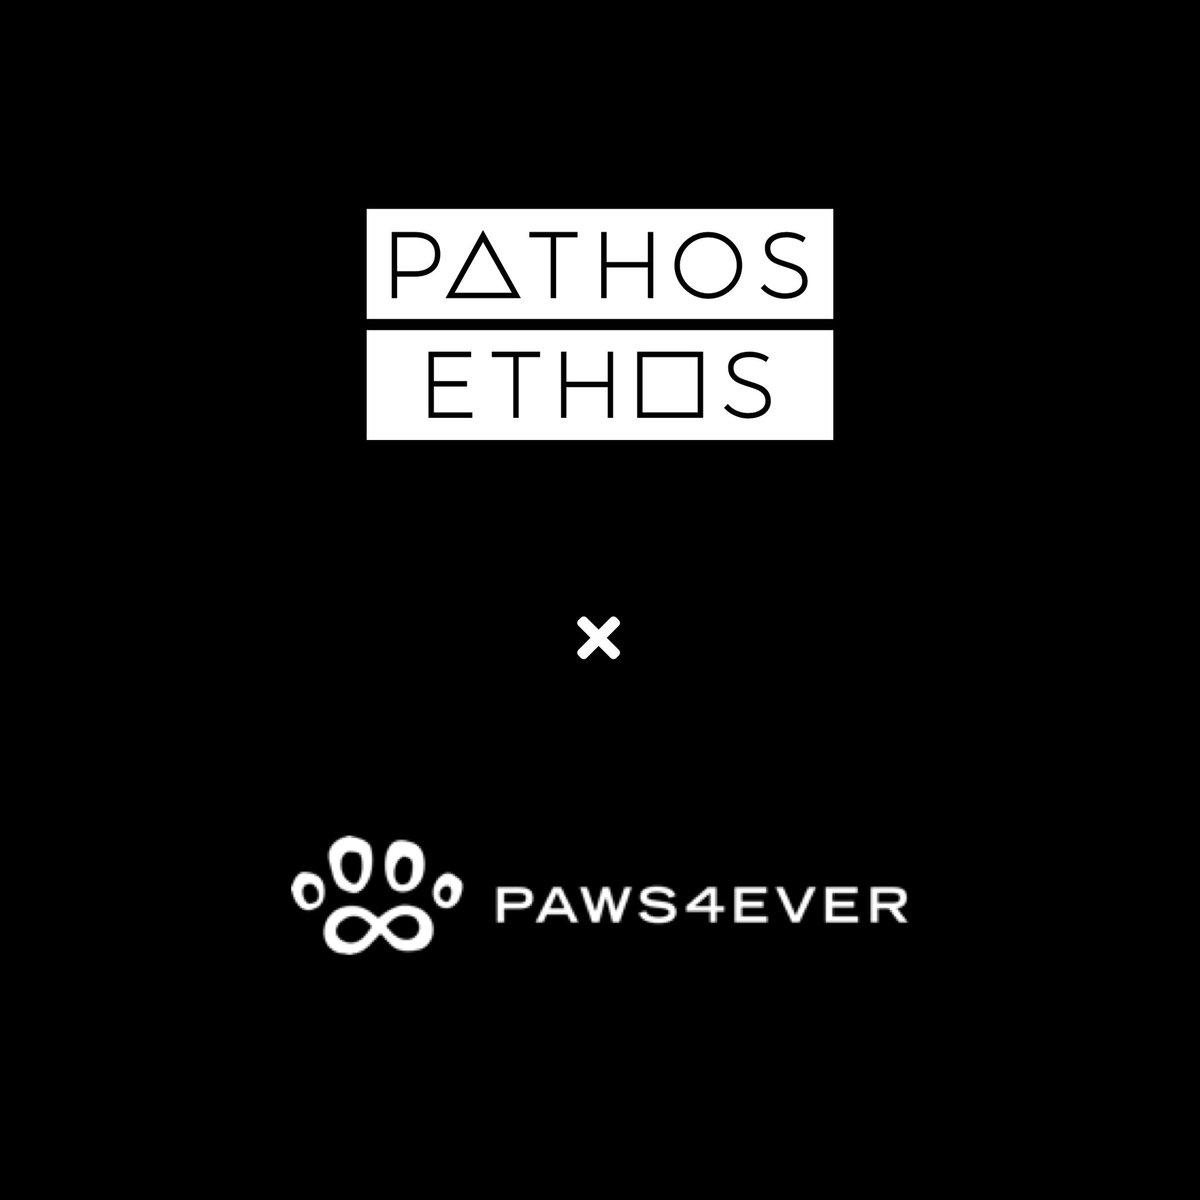 Last year, we had the chance to redesign the Paws4ever website! While we love every client that we work with, getting to look at these four legged friends all day during design and development was extra exciting.⁣